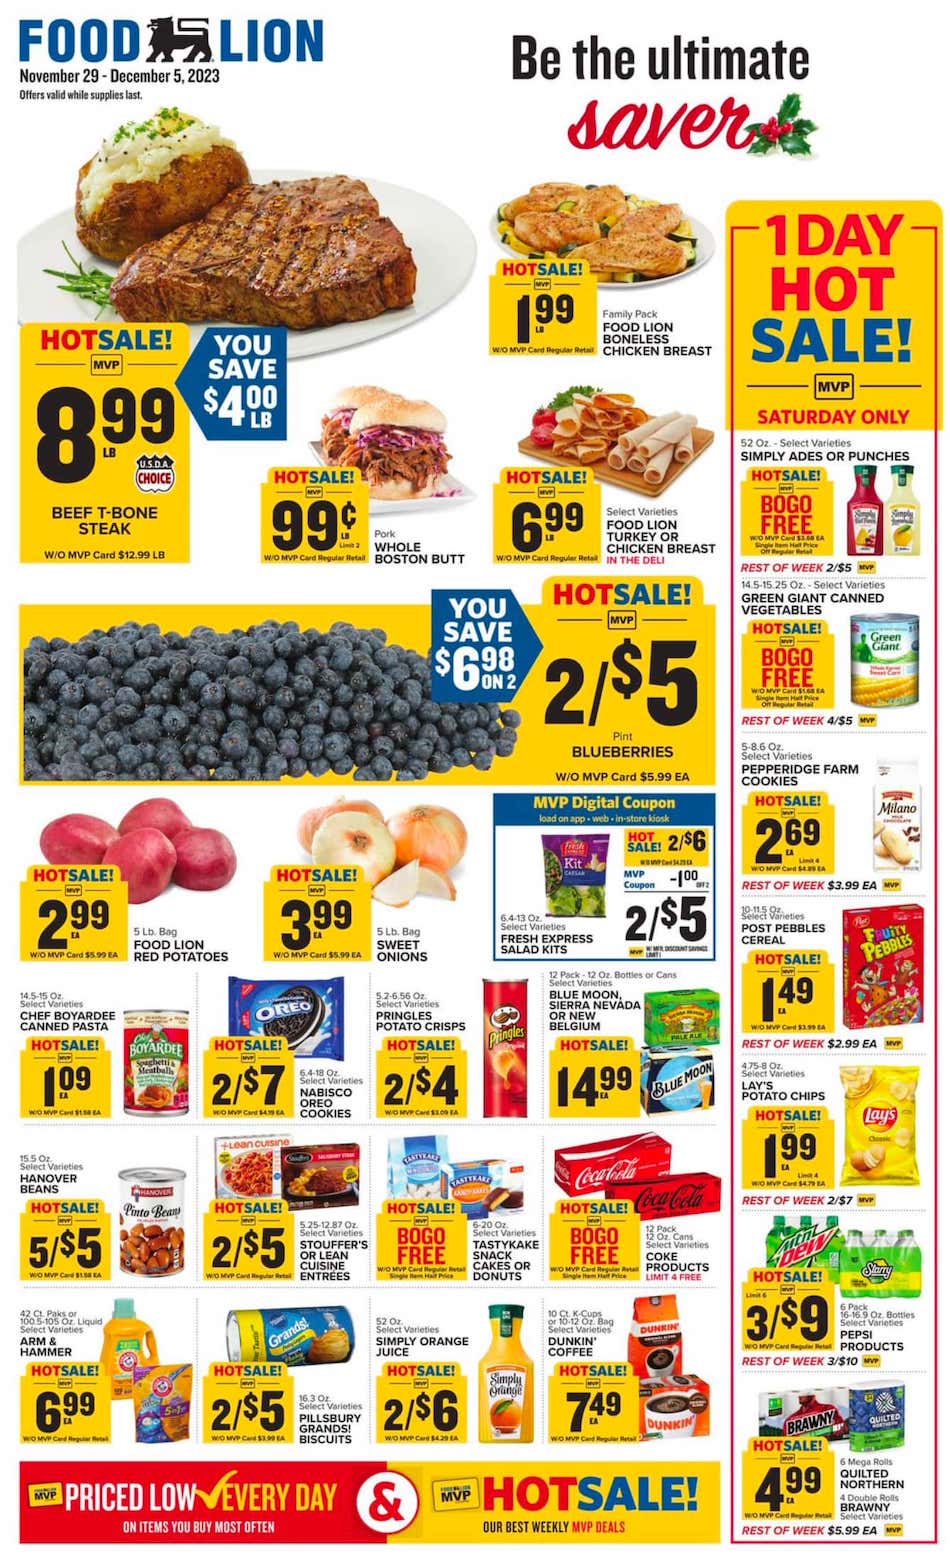 Food Lion Weekly Ad 29th November – 5th December 2023 Page 1